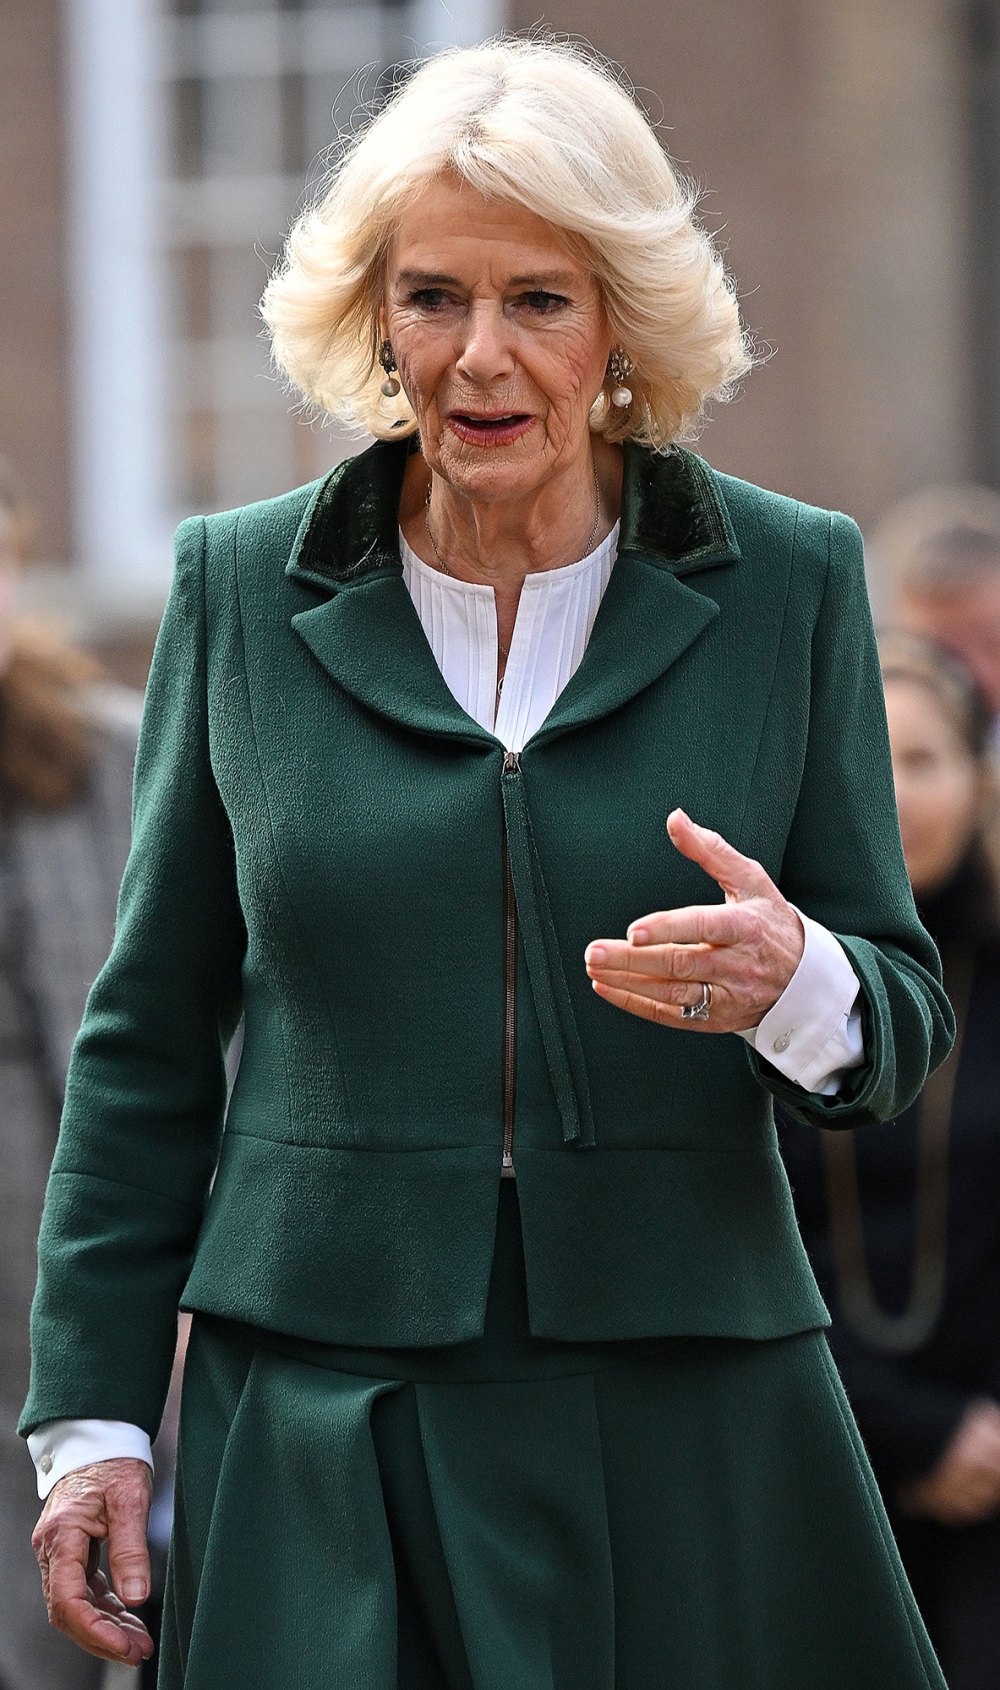 Queen Consort Camilla Tests Positive for COVID-19, Cancels Public Engagements - 777